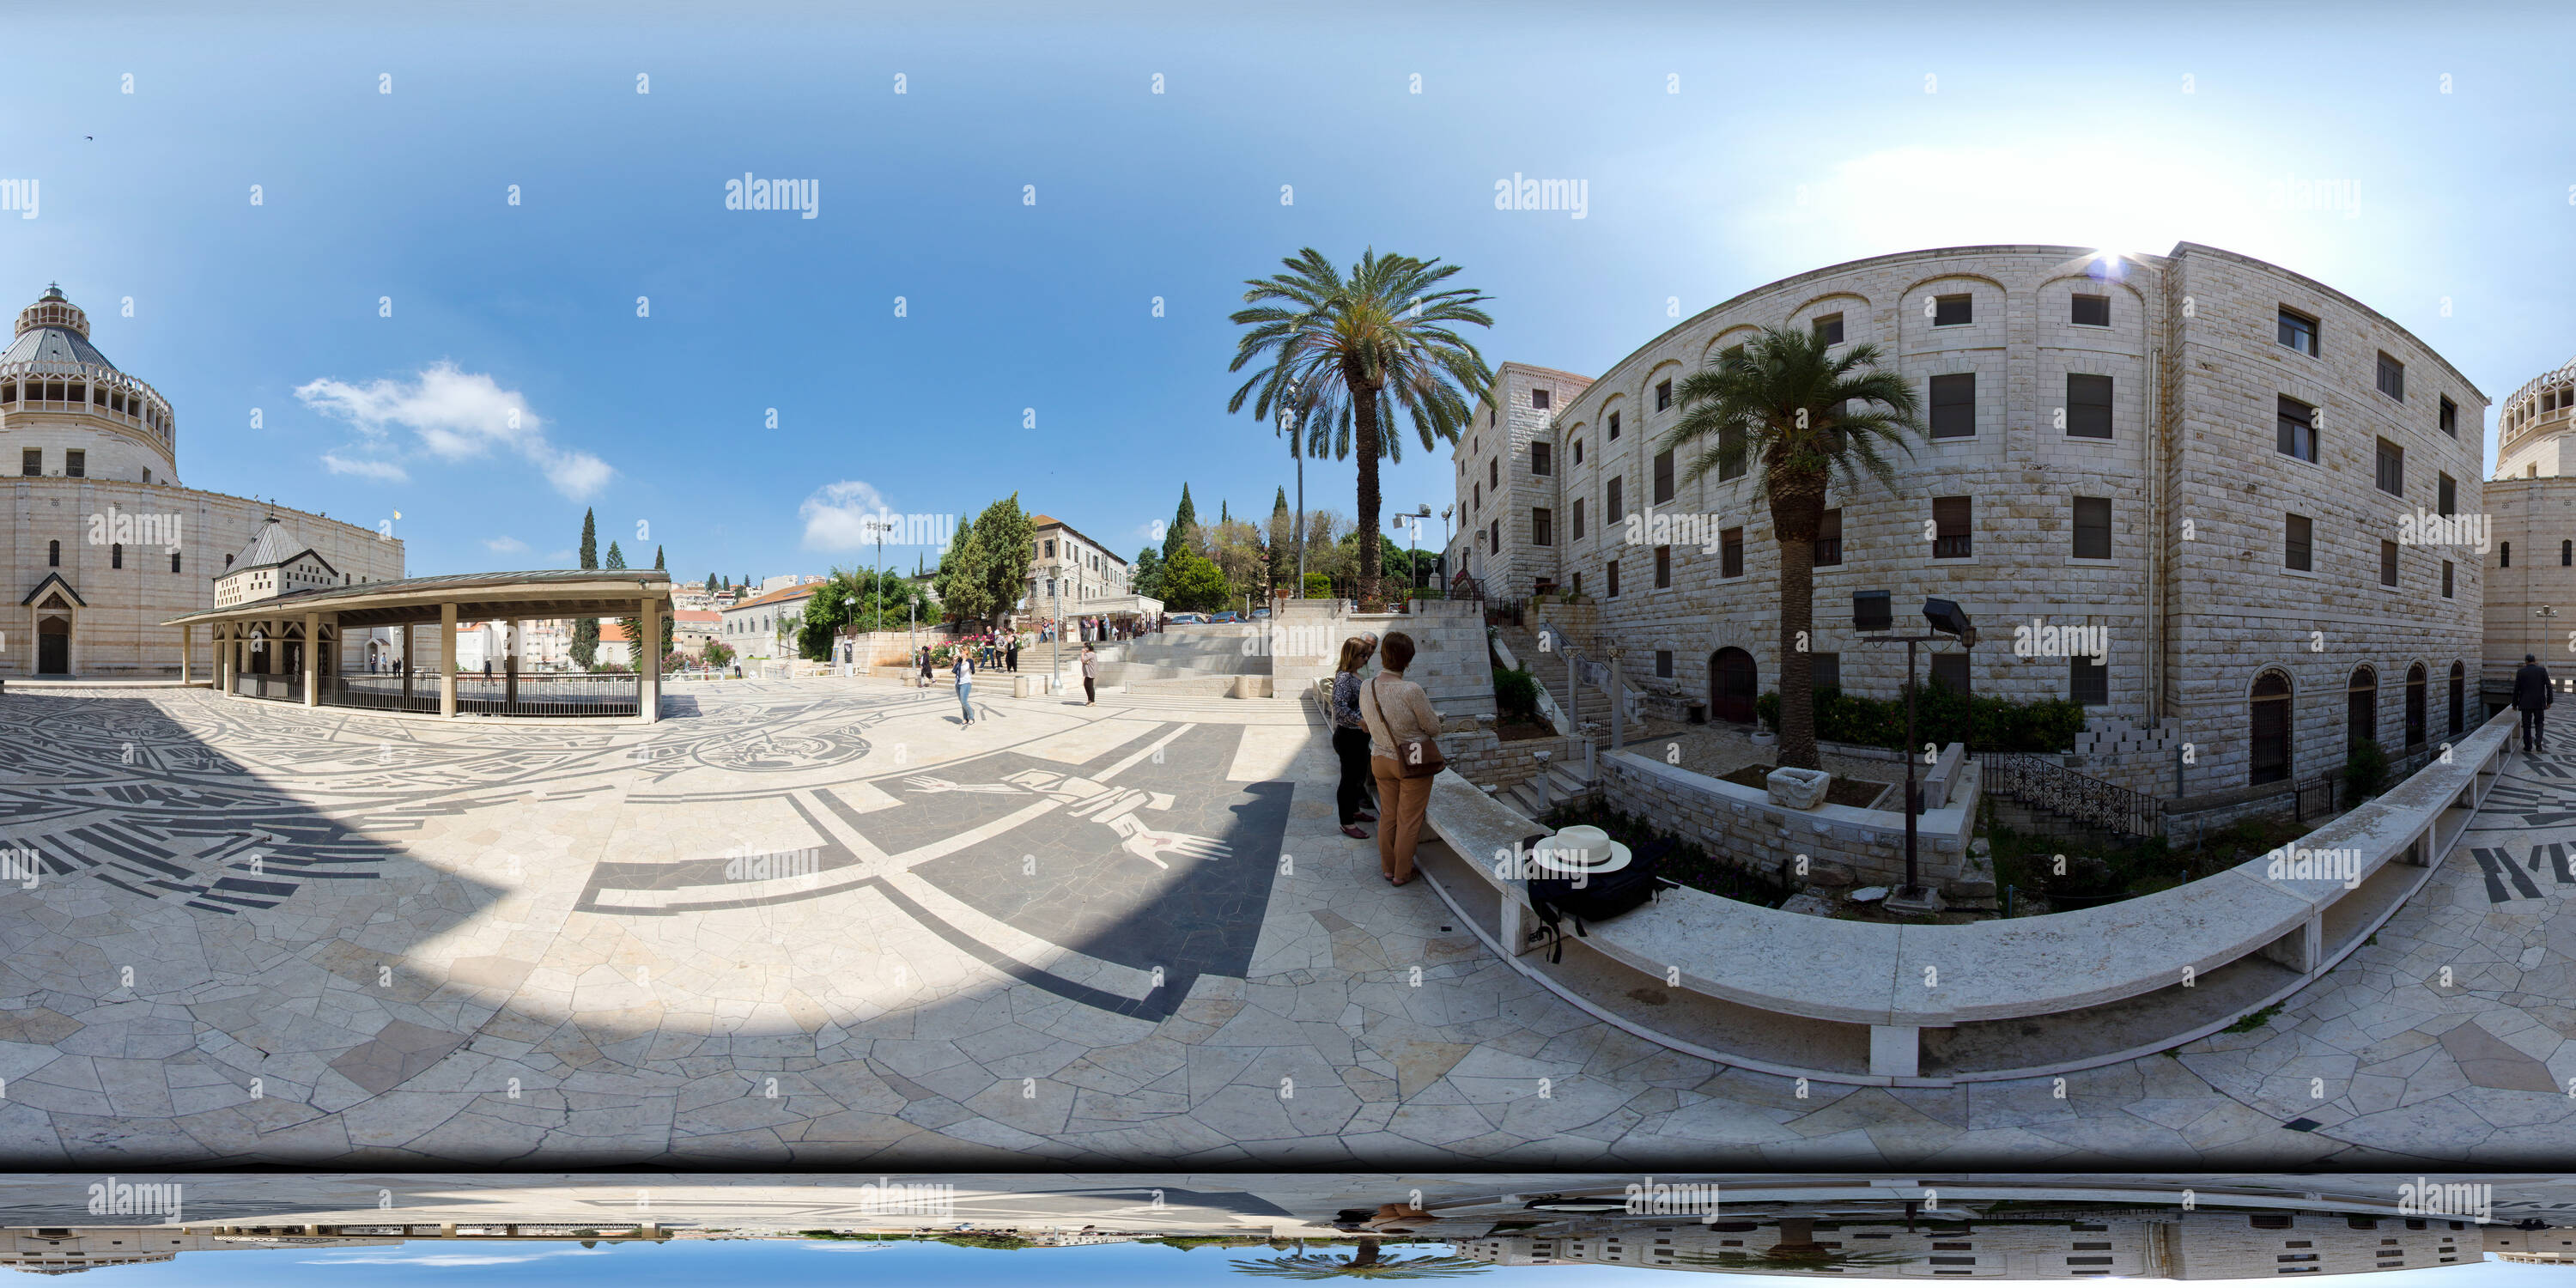 360 degree panoramic view of Basilica of the Annunciation, Nazareth, Israel 2016-04, freehand